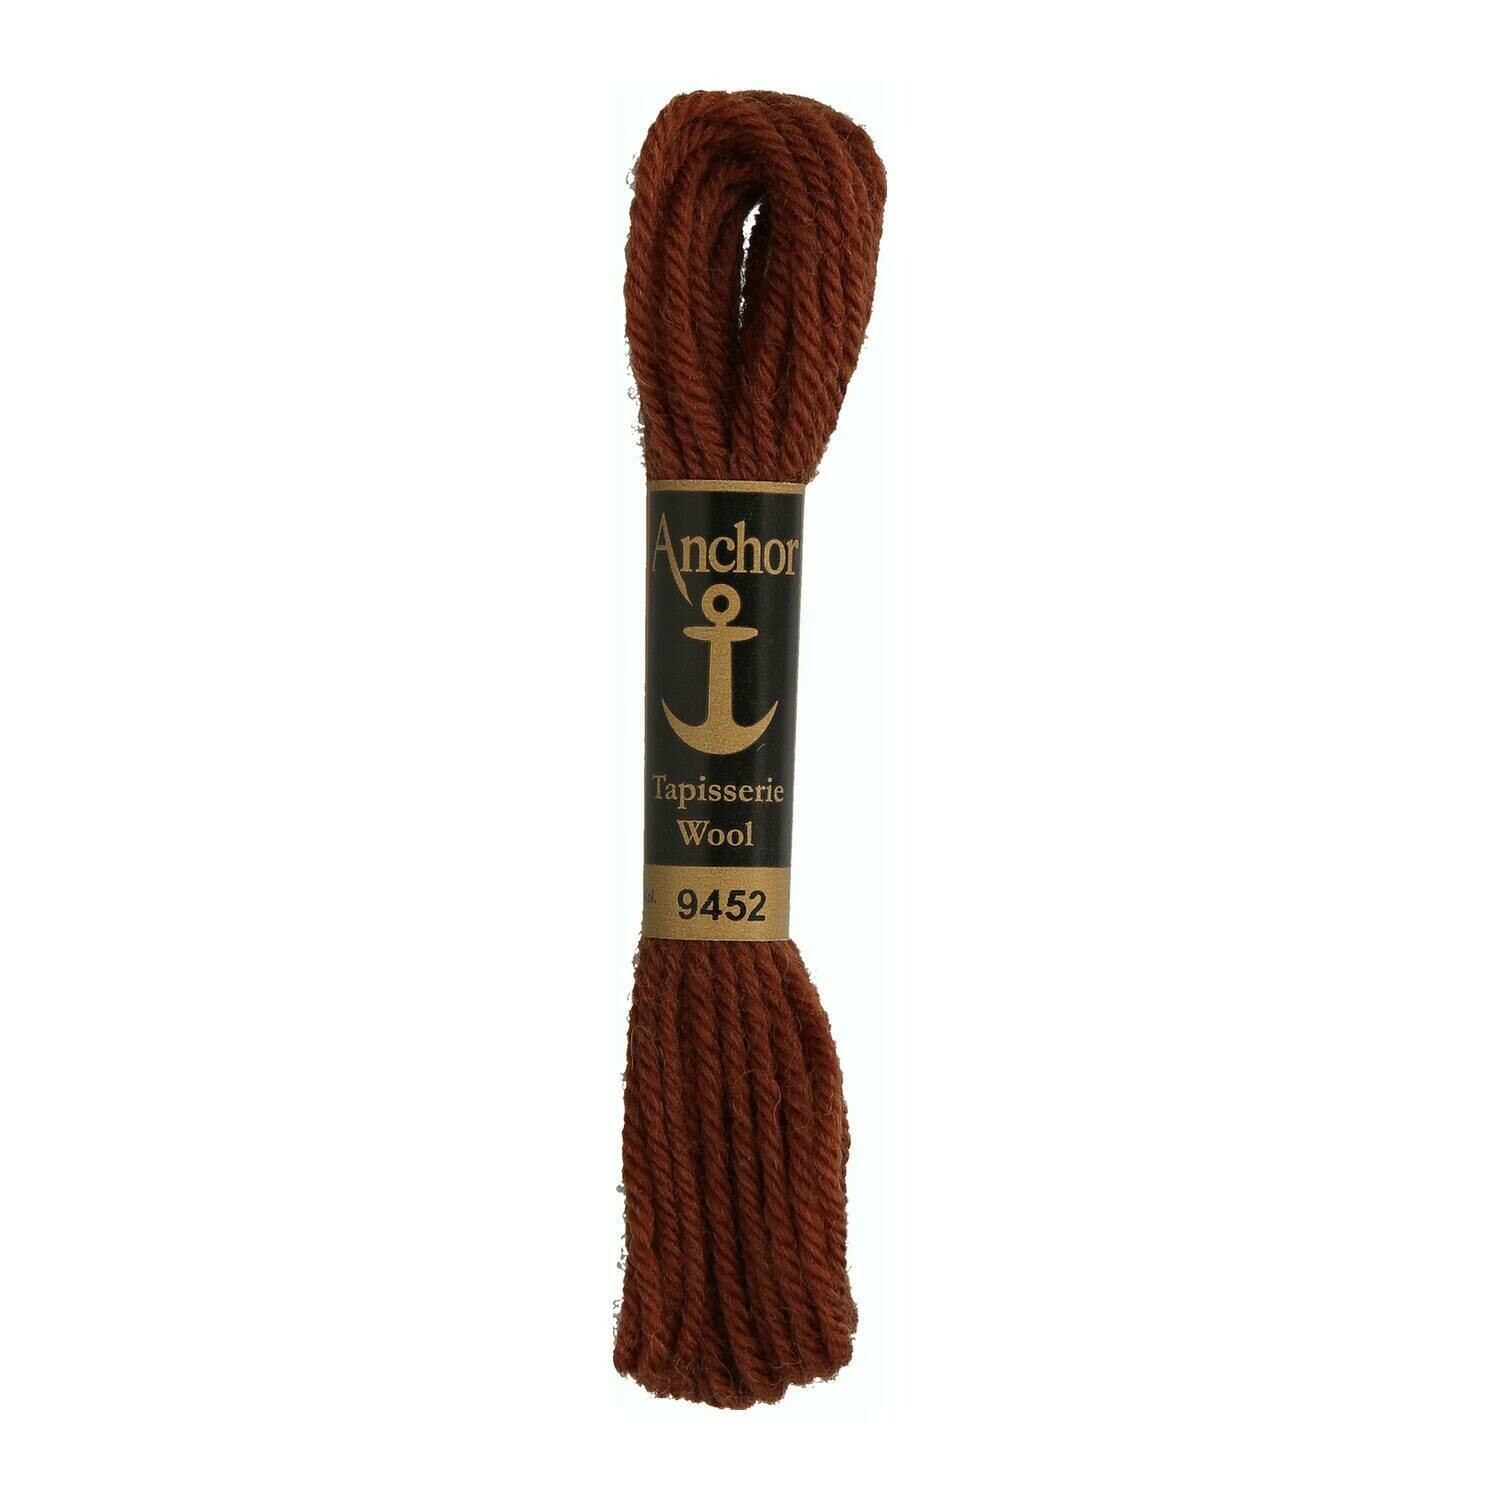 Anchor Tapisserie Wool #09452